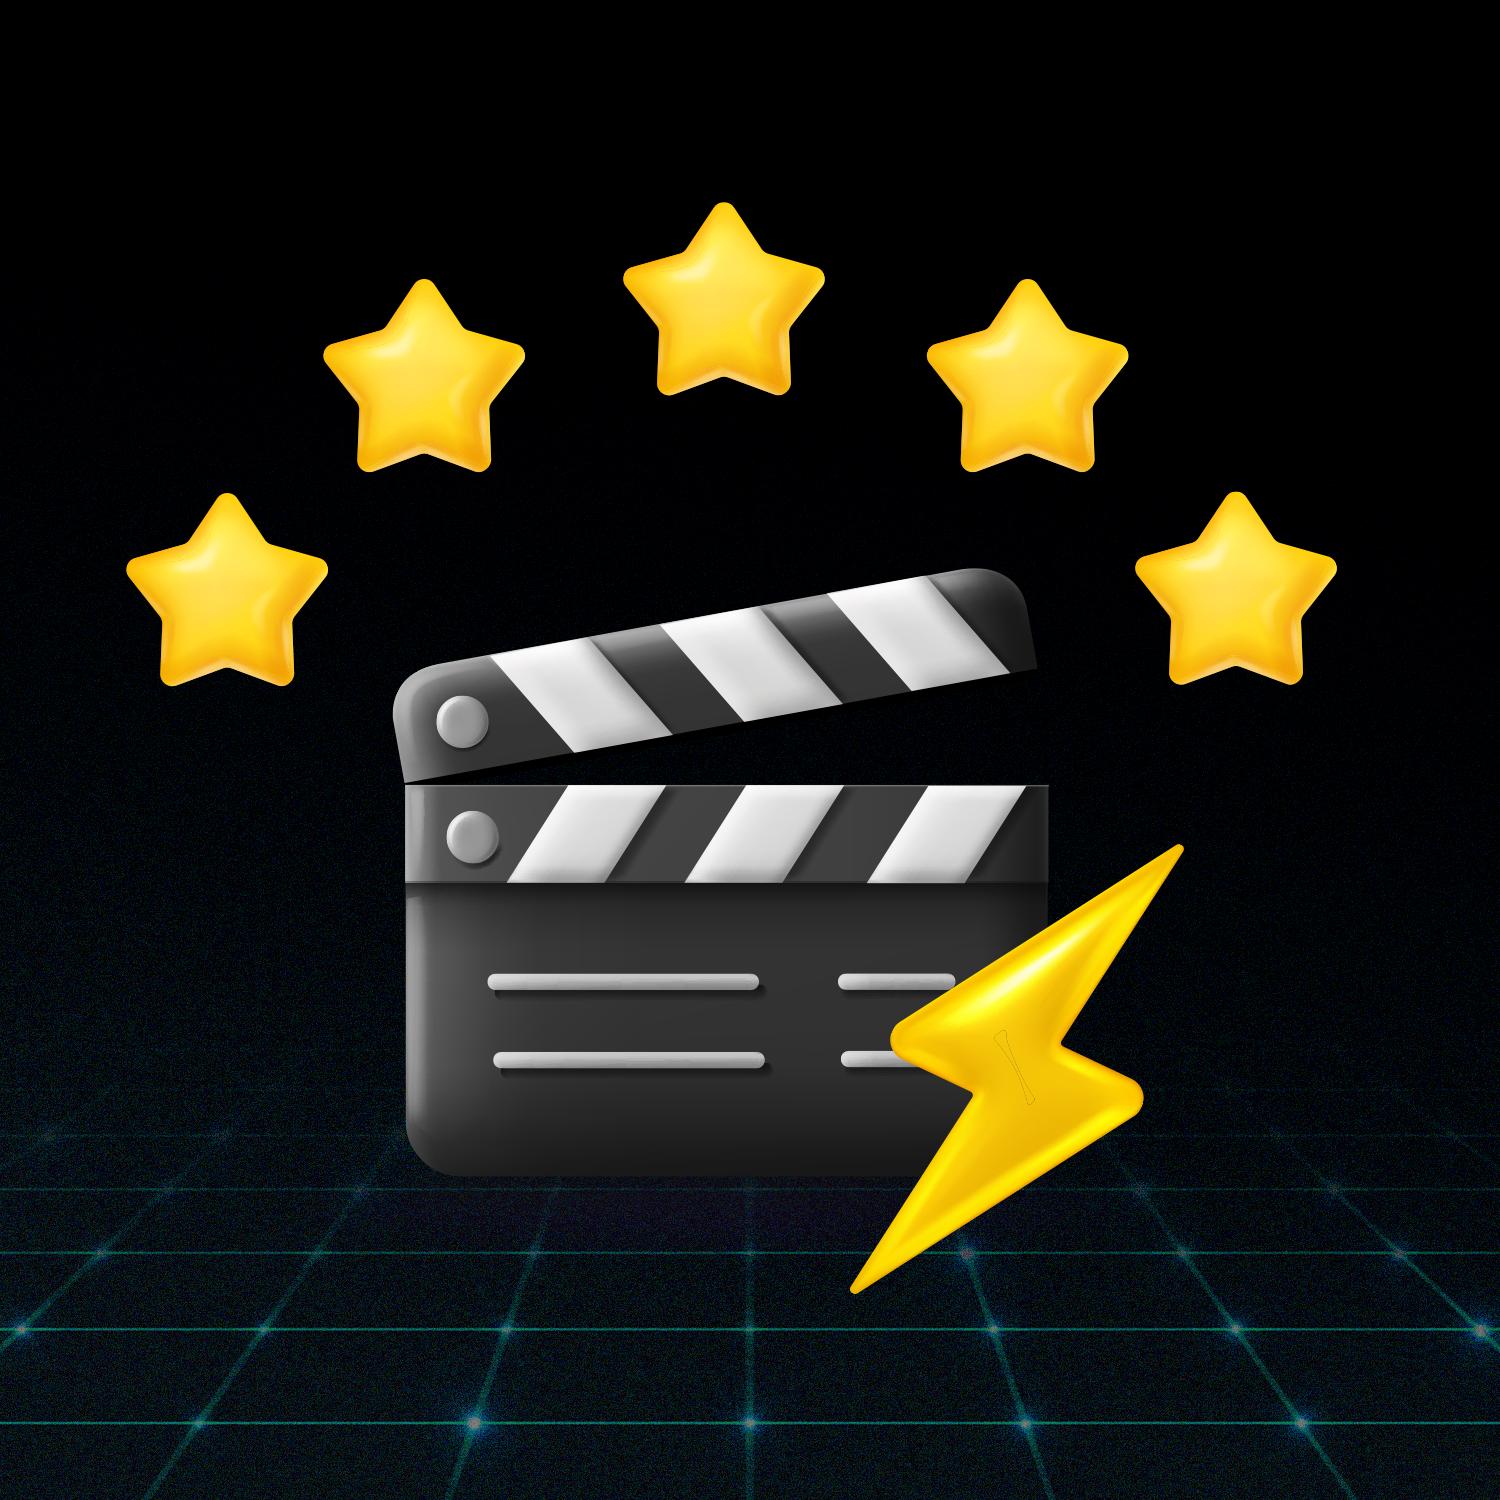 Review your video - lightning fast! ⚡️